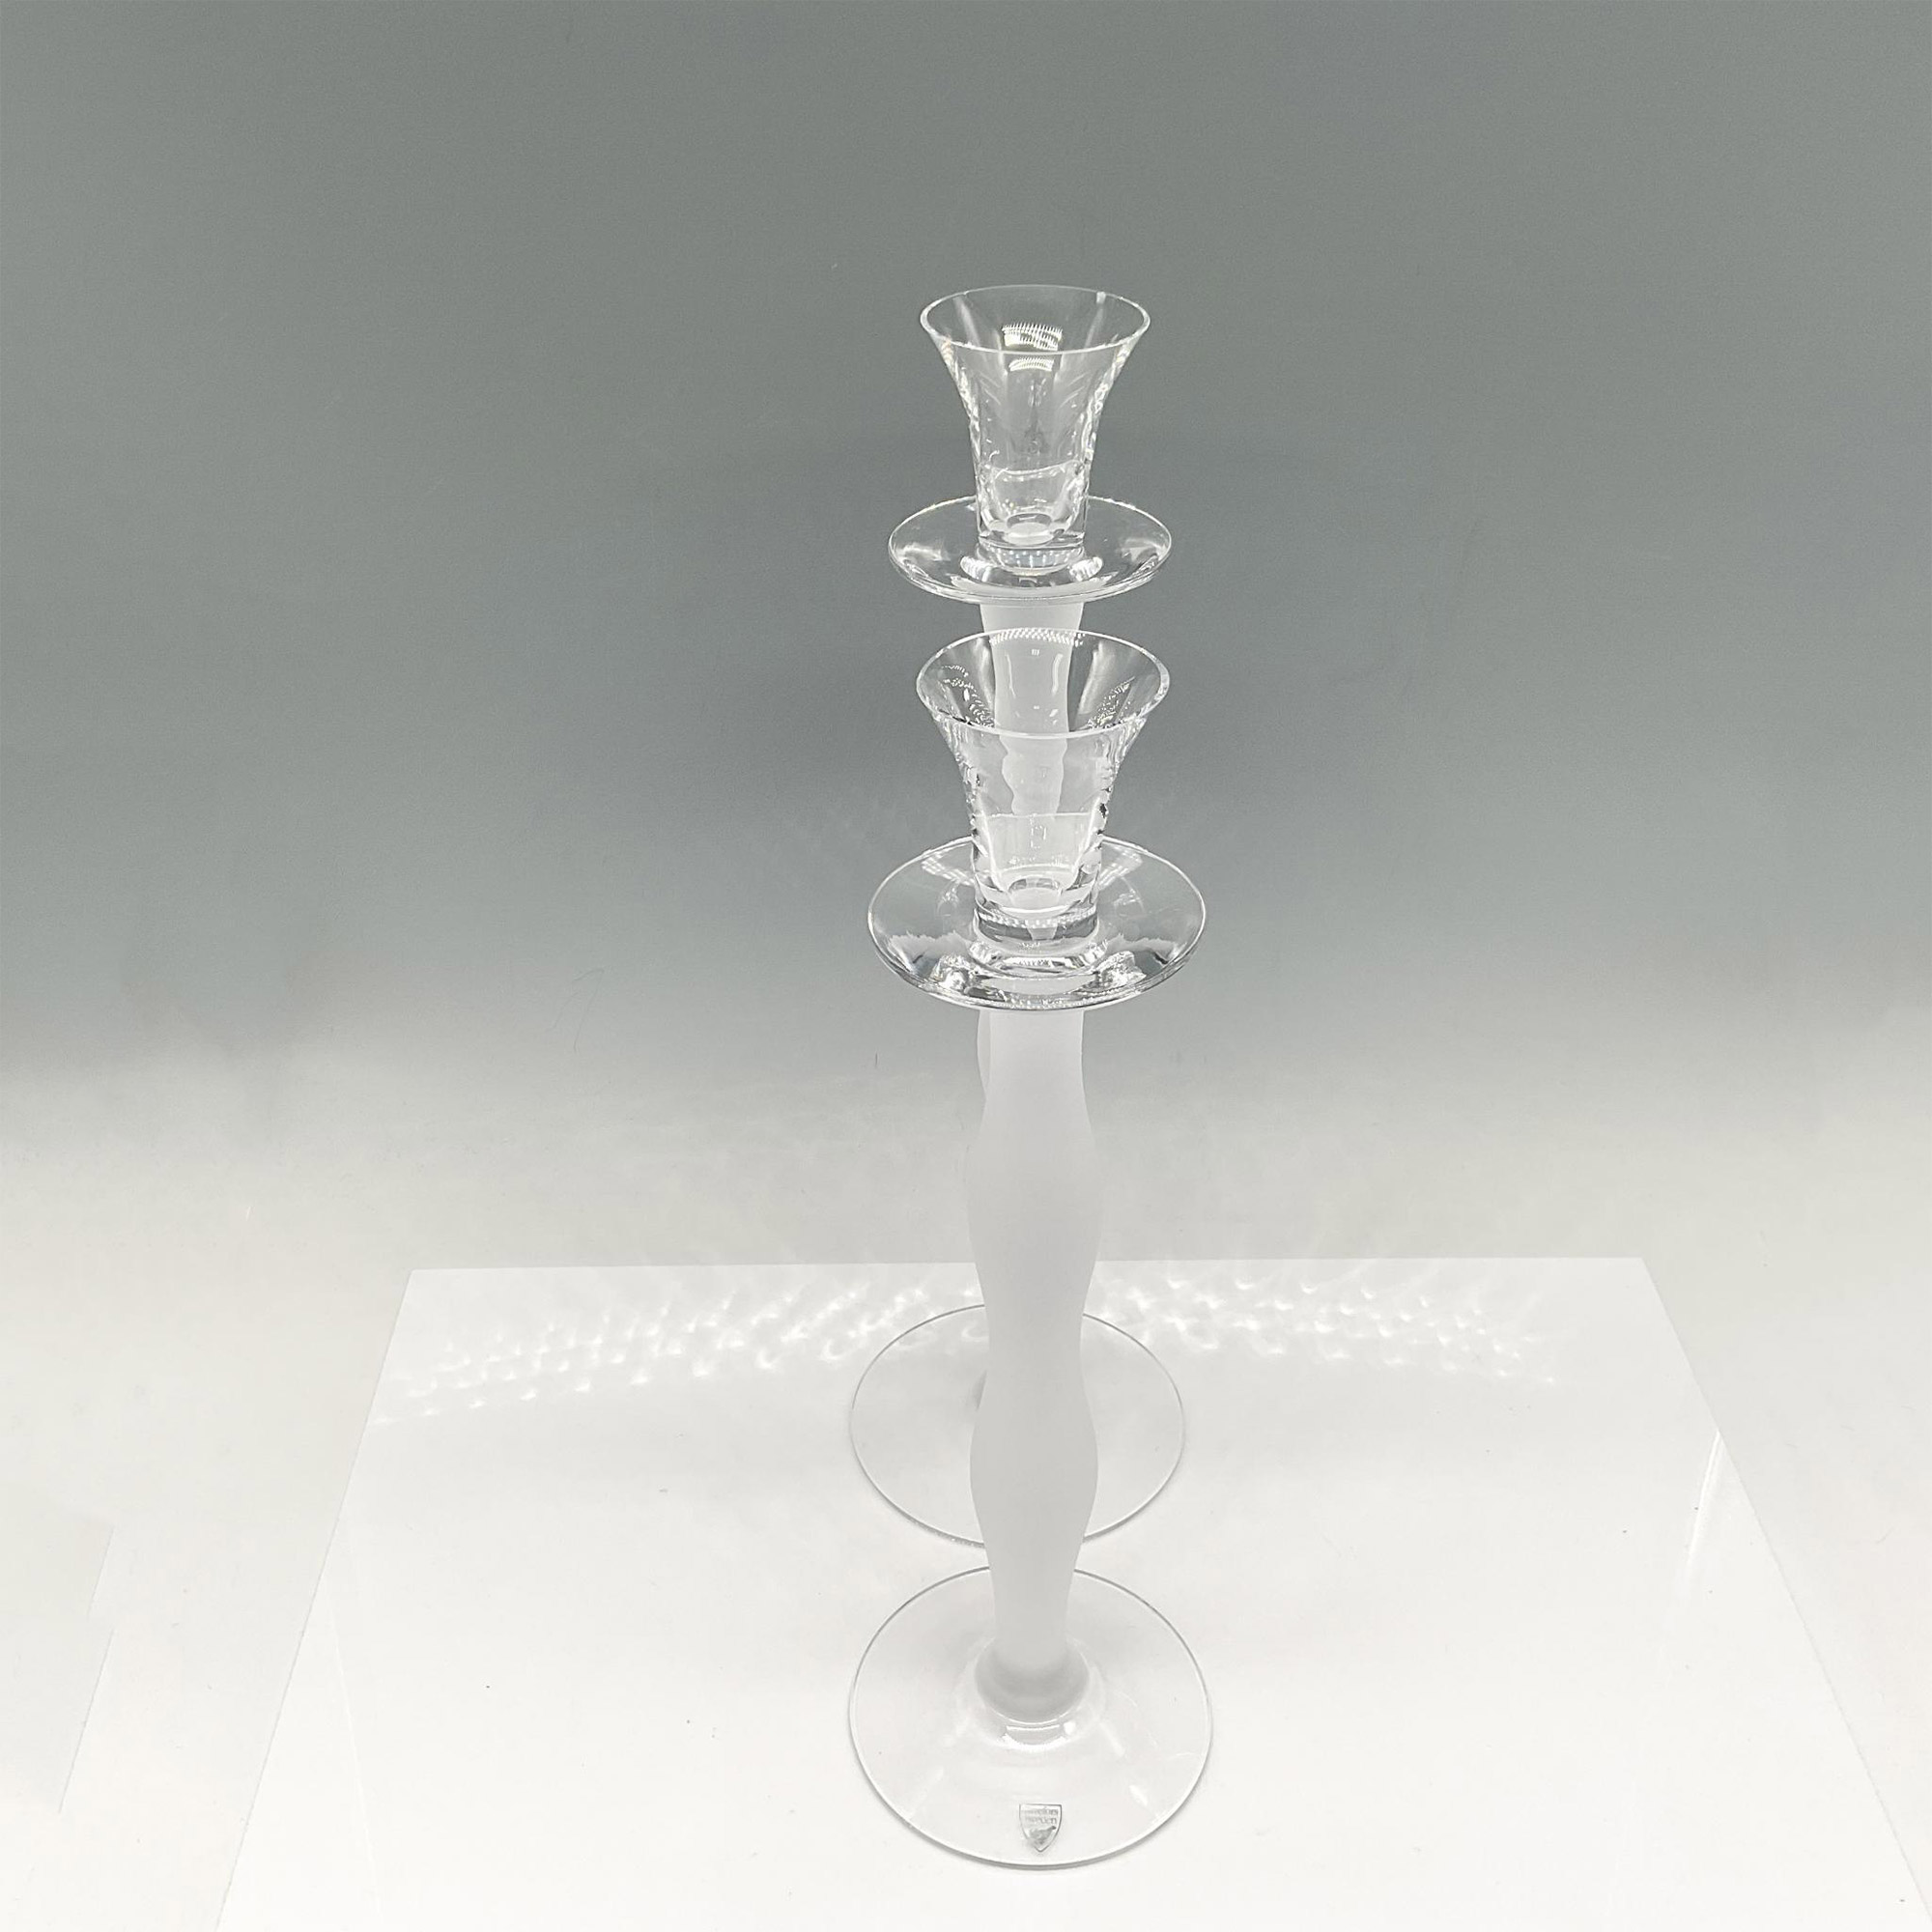 2pc Orrefors Crystal Frosted White Candle Holders, Celeste - Image 2 of 3